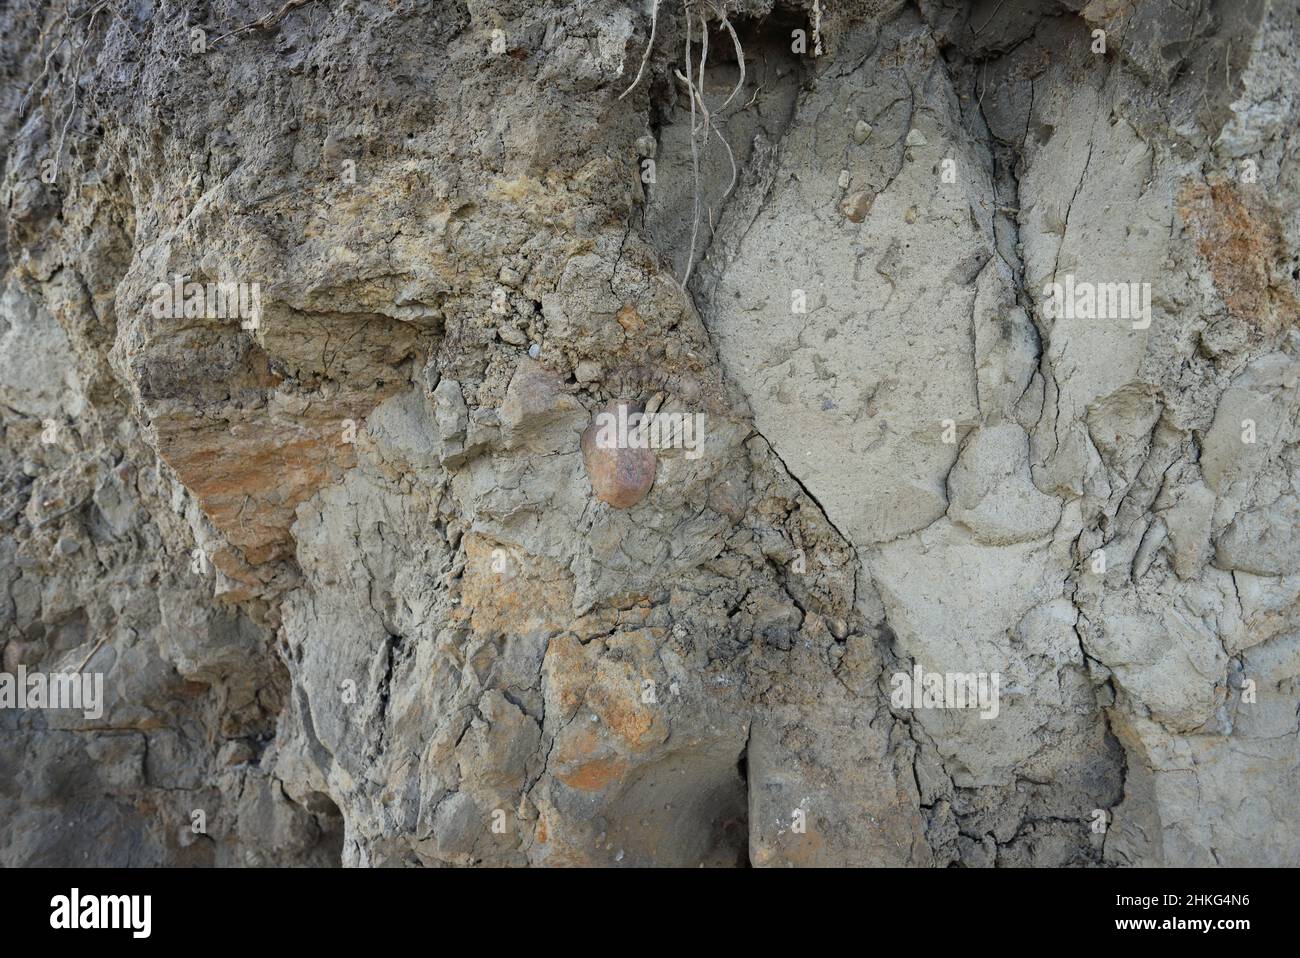 Clay soil wall cross-section on the coast Stock Photo